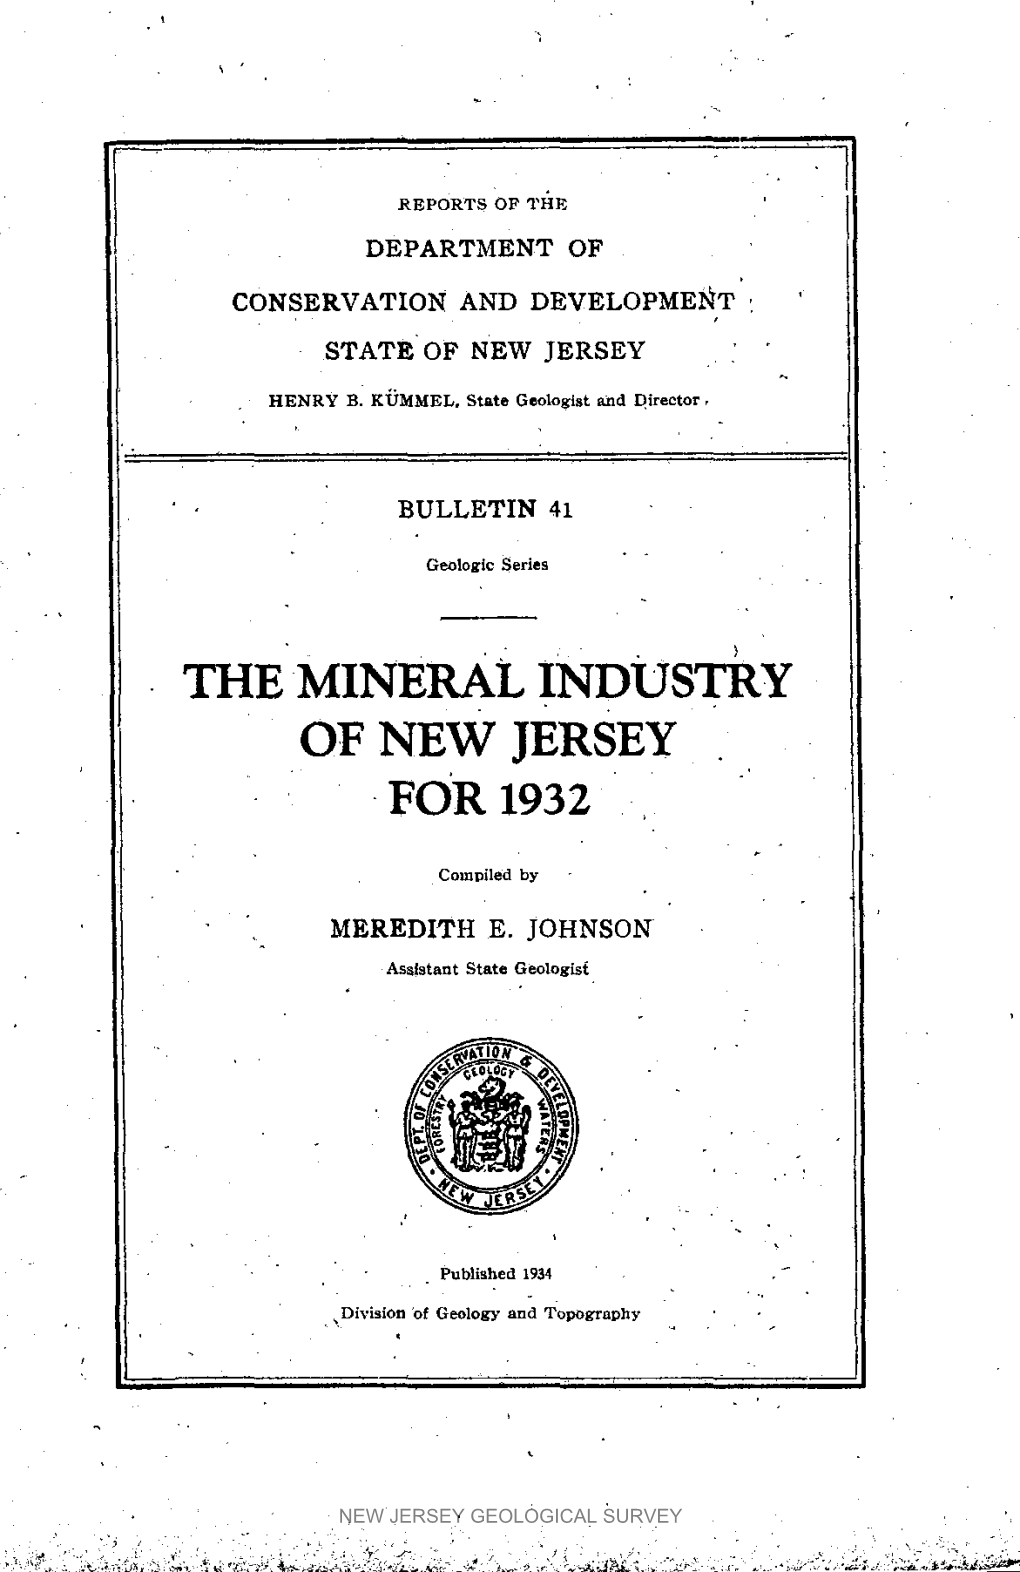 Bulletin 41, the Mineral Industry of New Jersey for 1932